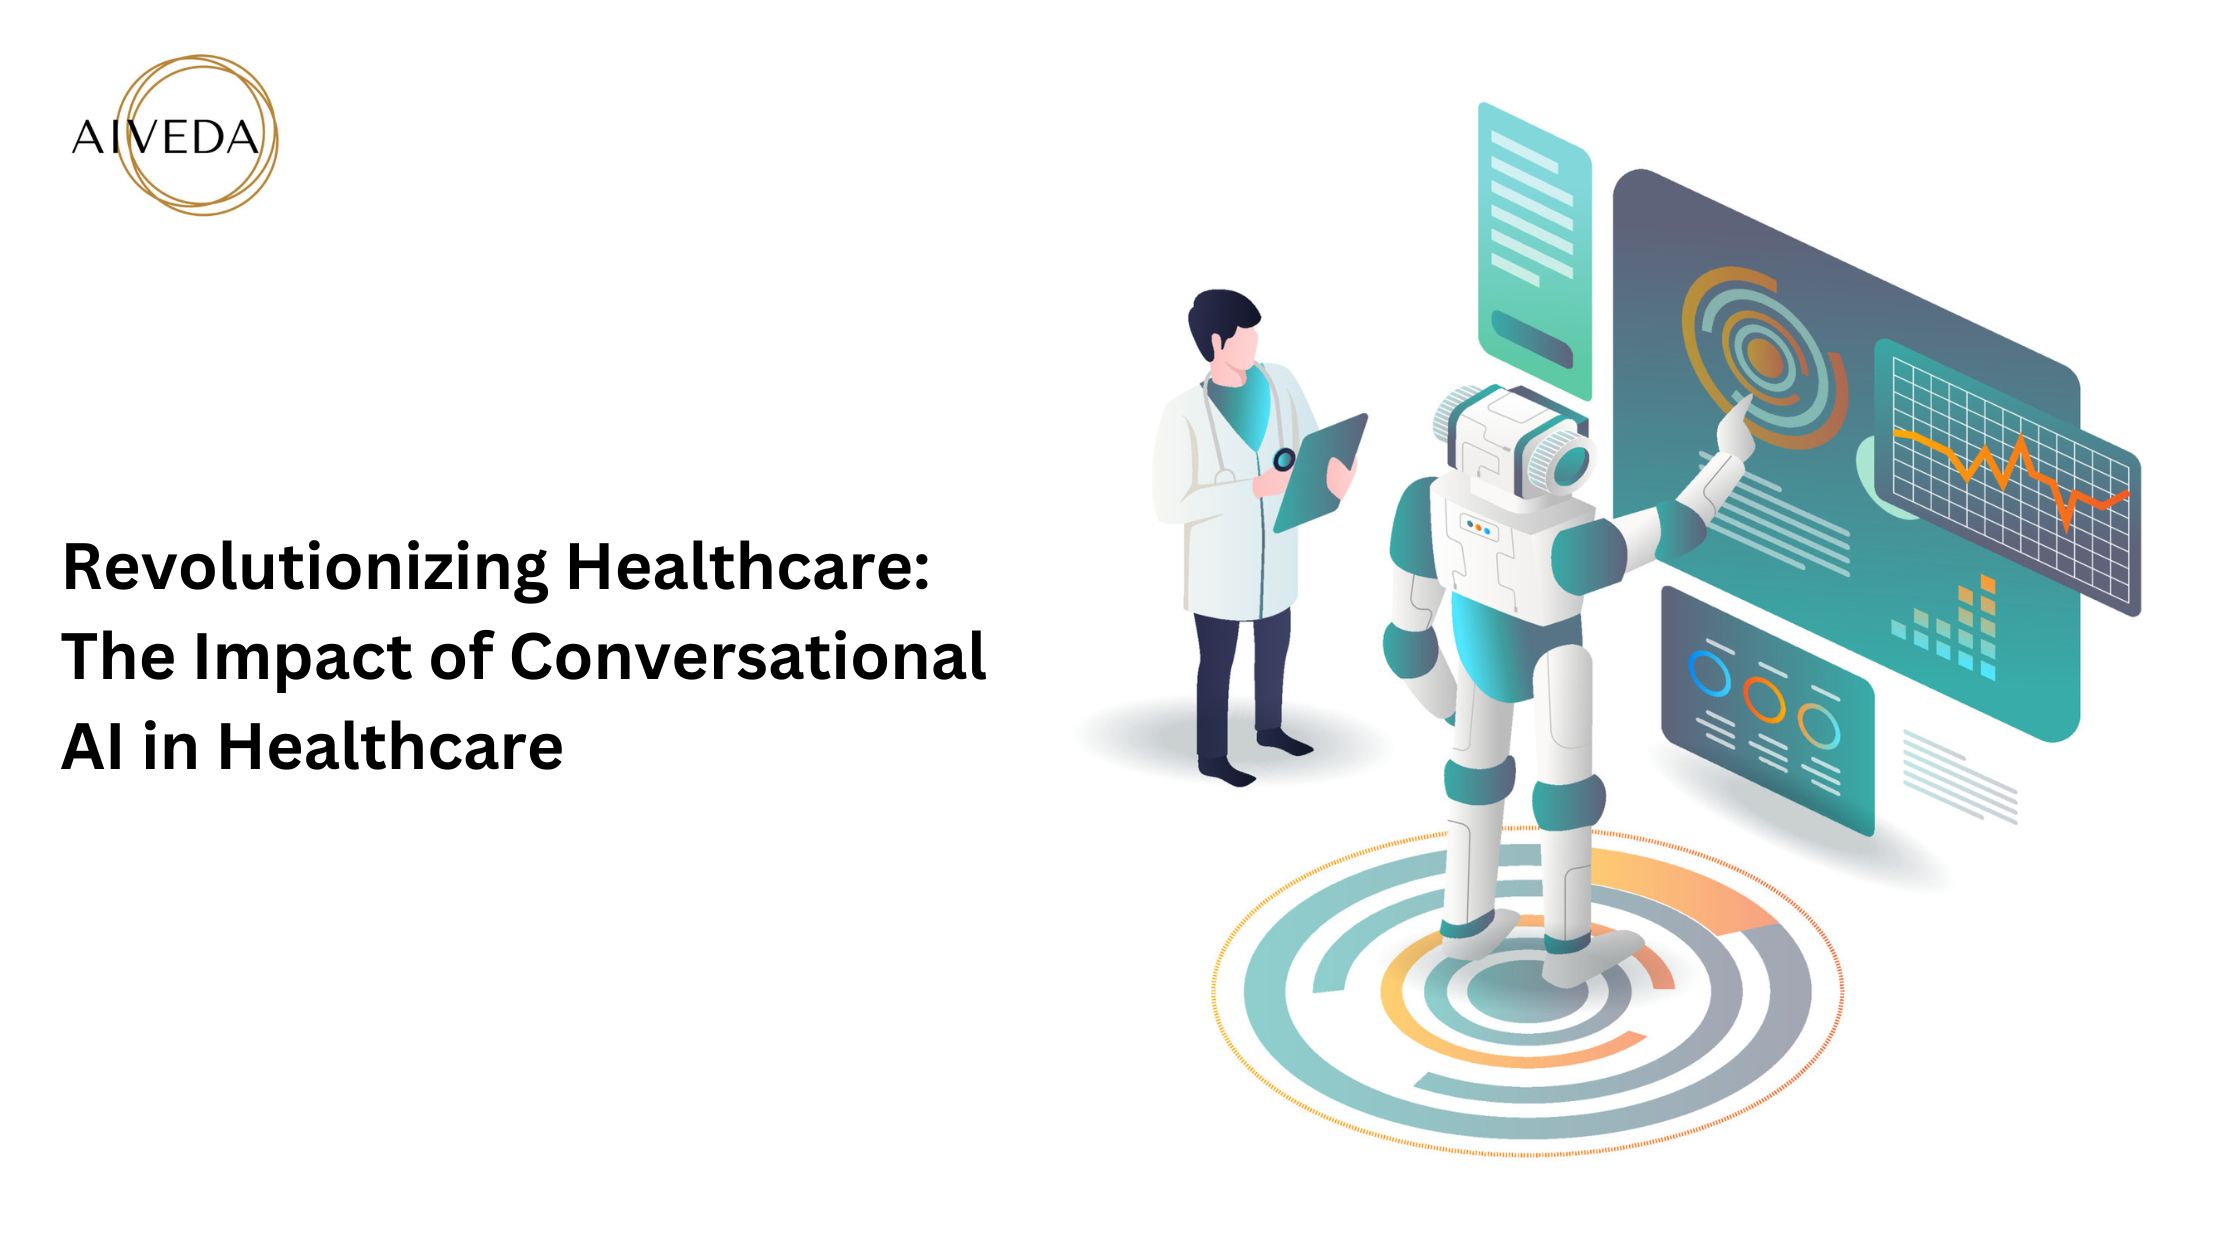 The Impact of Conversational AI in Healthcare